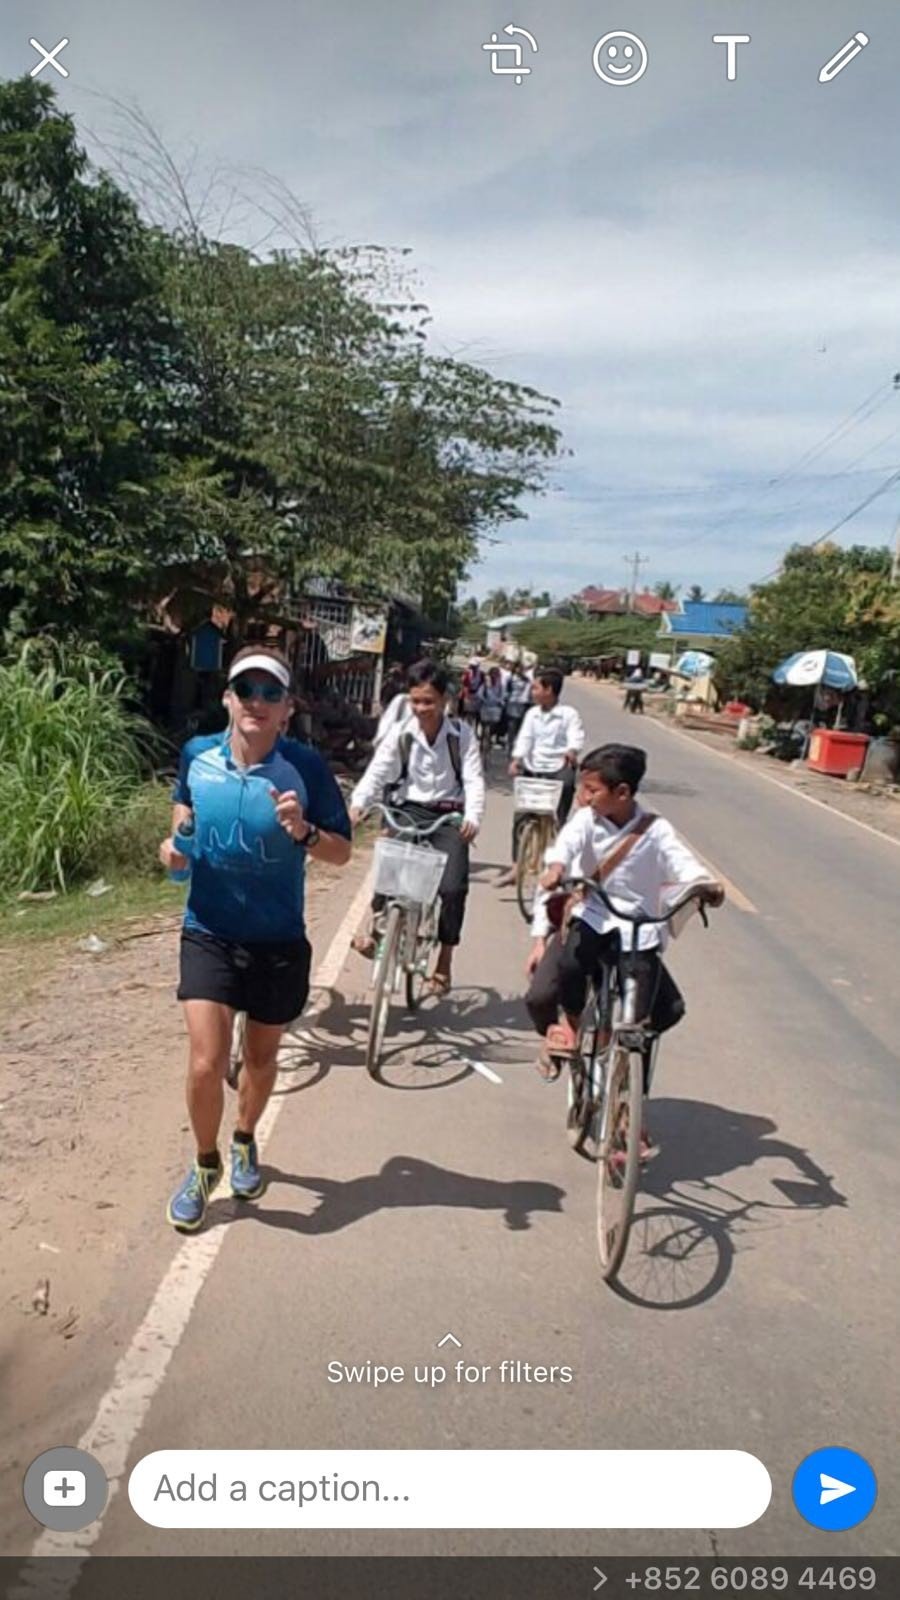 Matthew Pocock (pictured) is running 300km through Cambodia for charity. Photos: Handouts